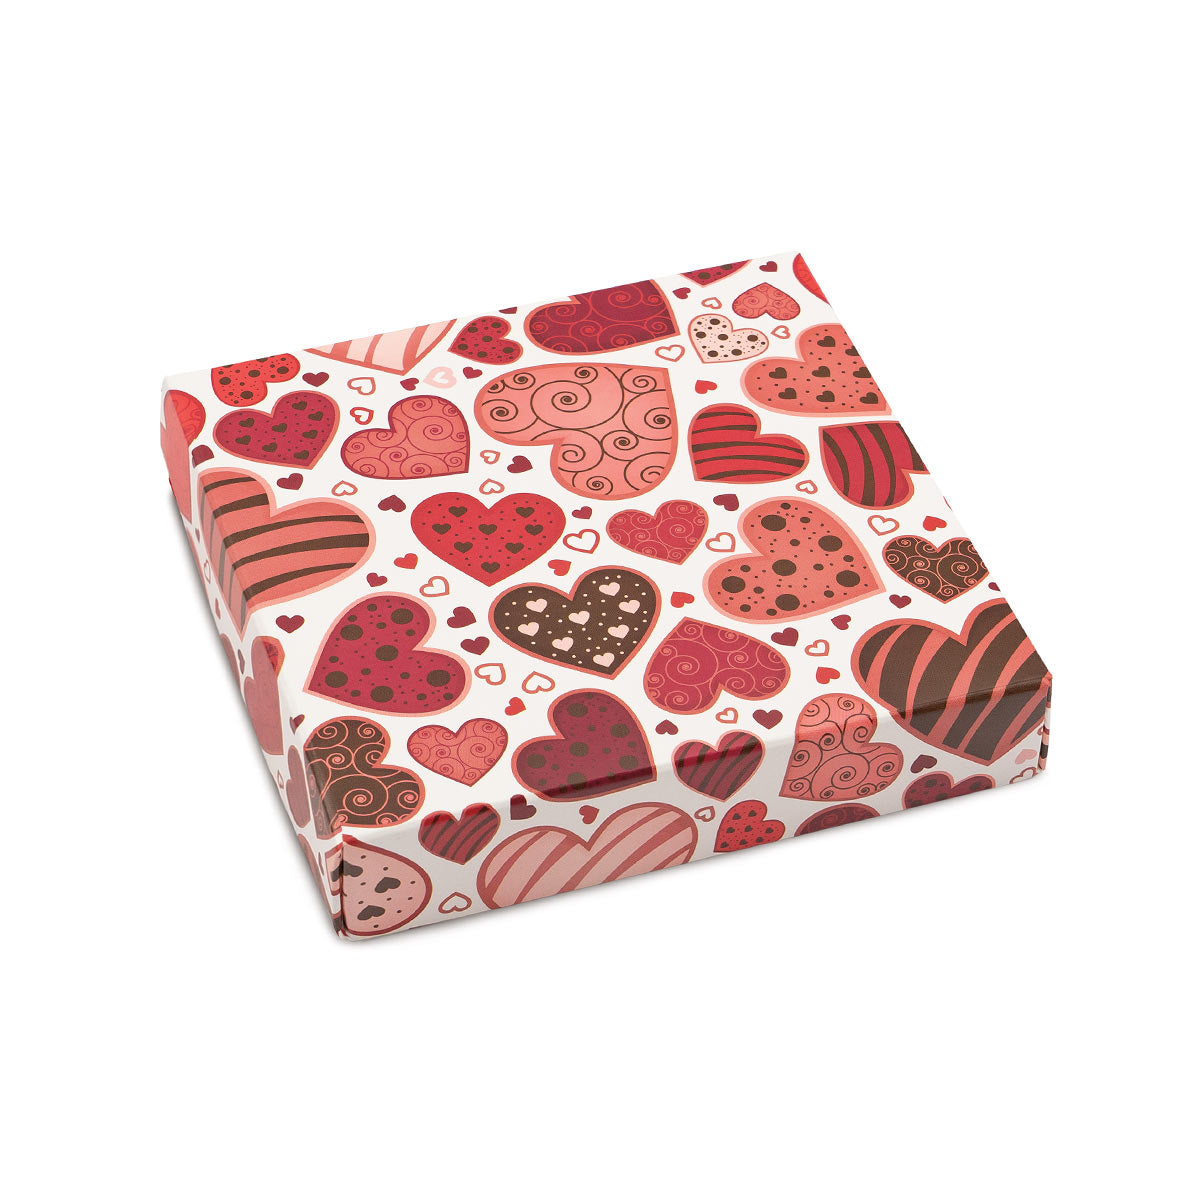 Heart  Themed Box Cover for 16 Piece Holiday Assortment